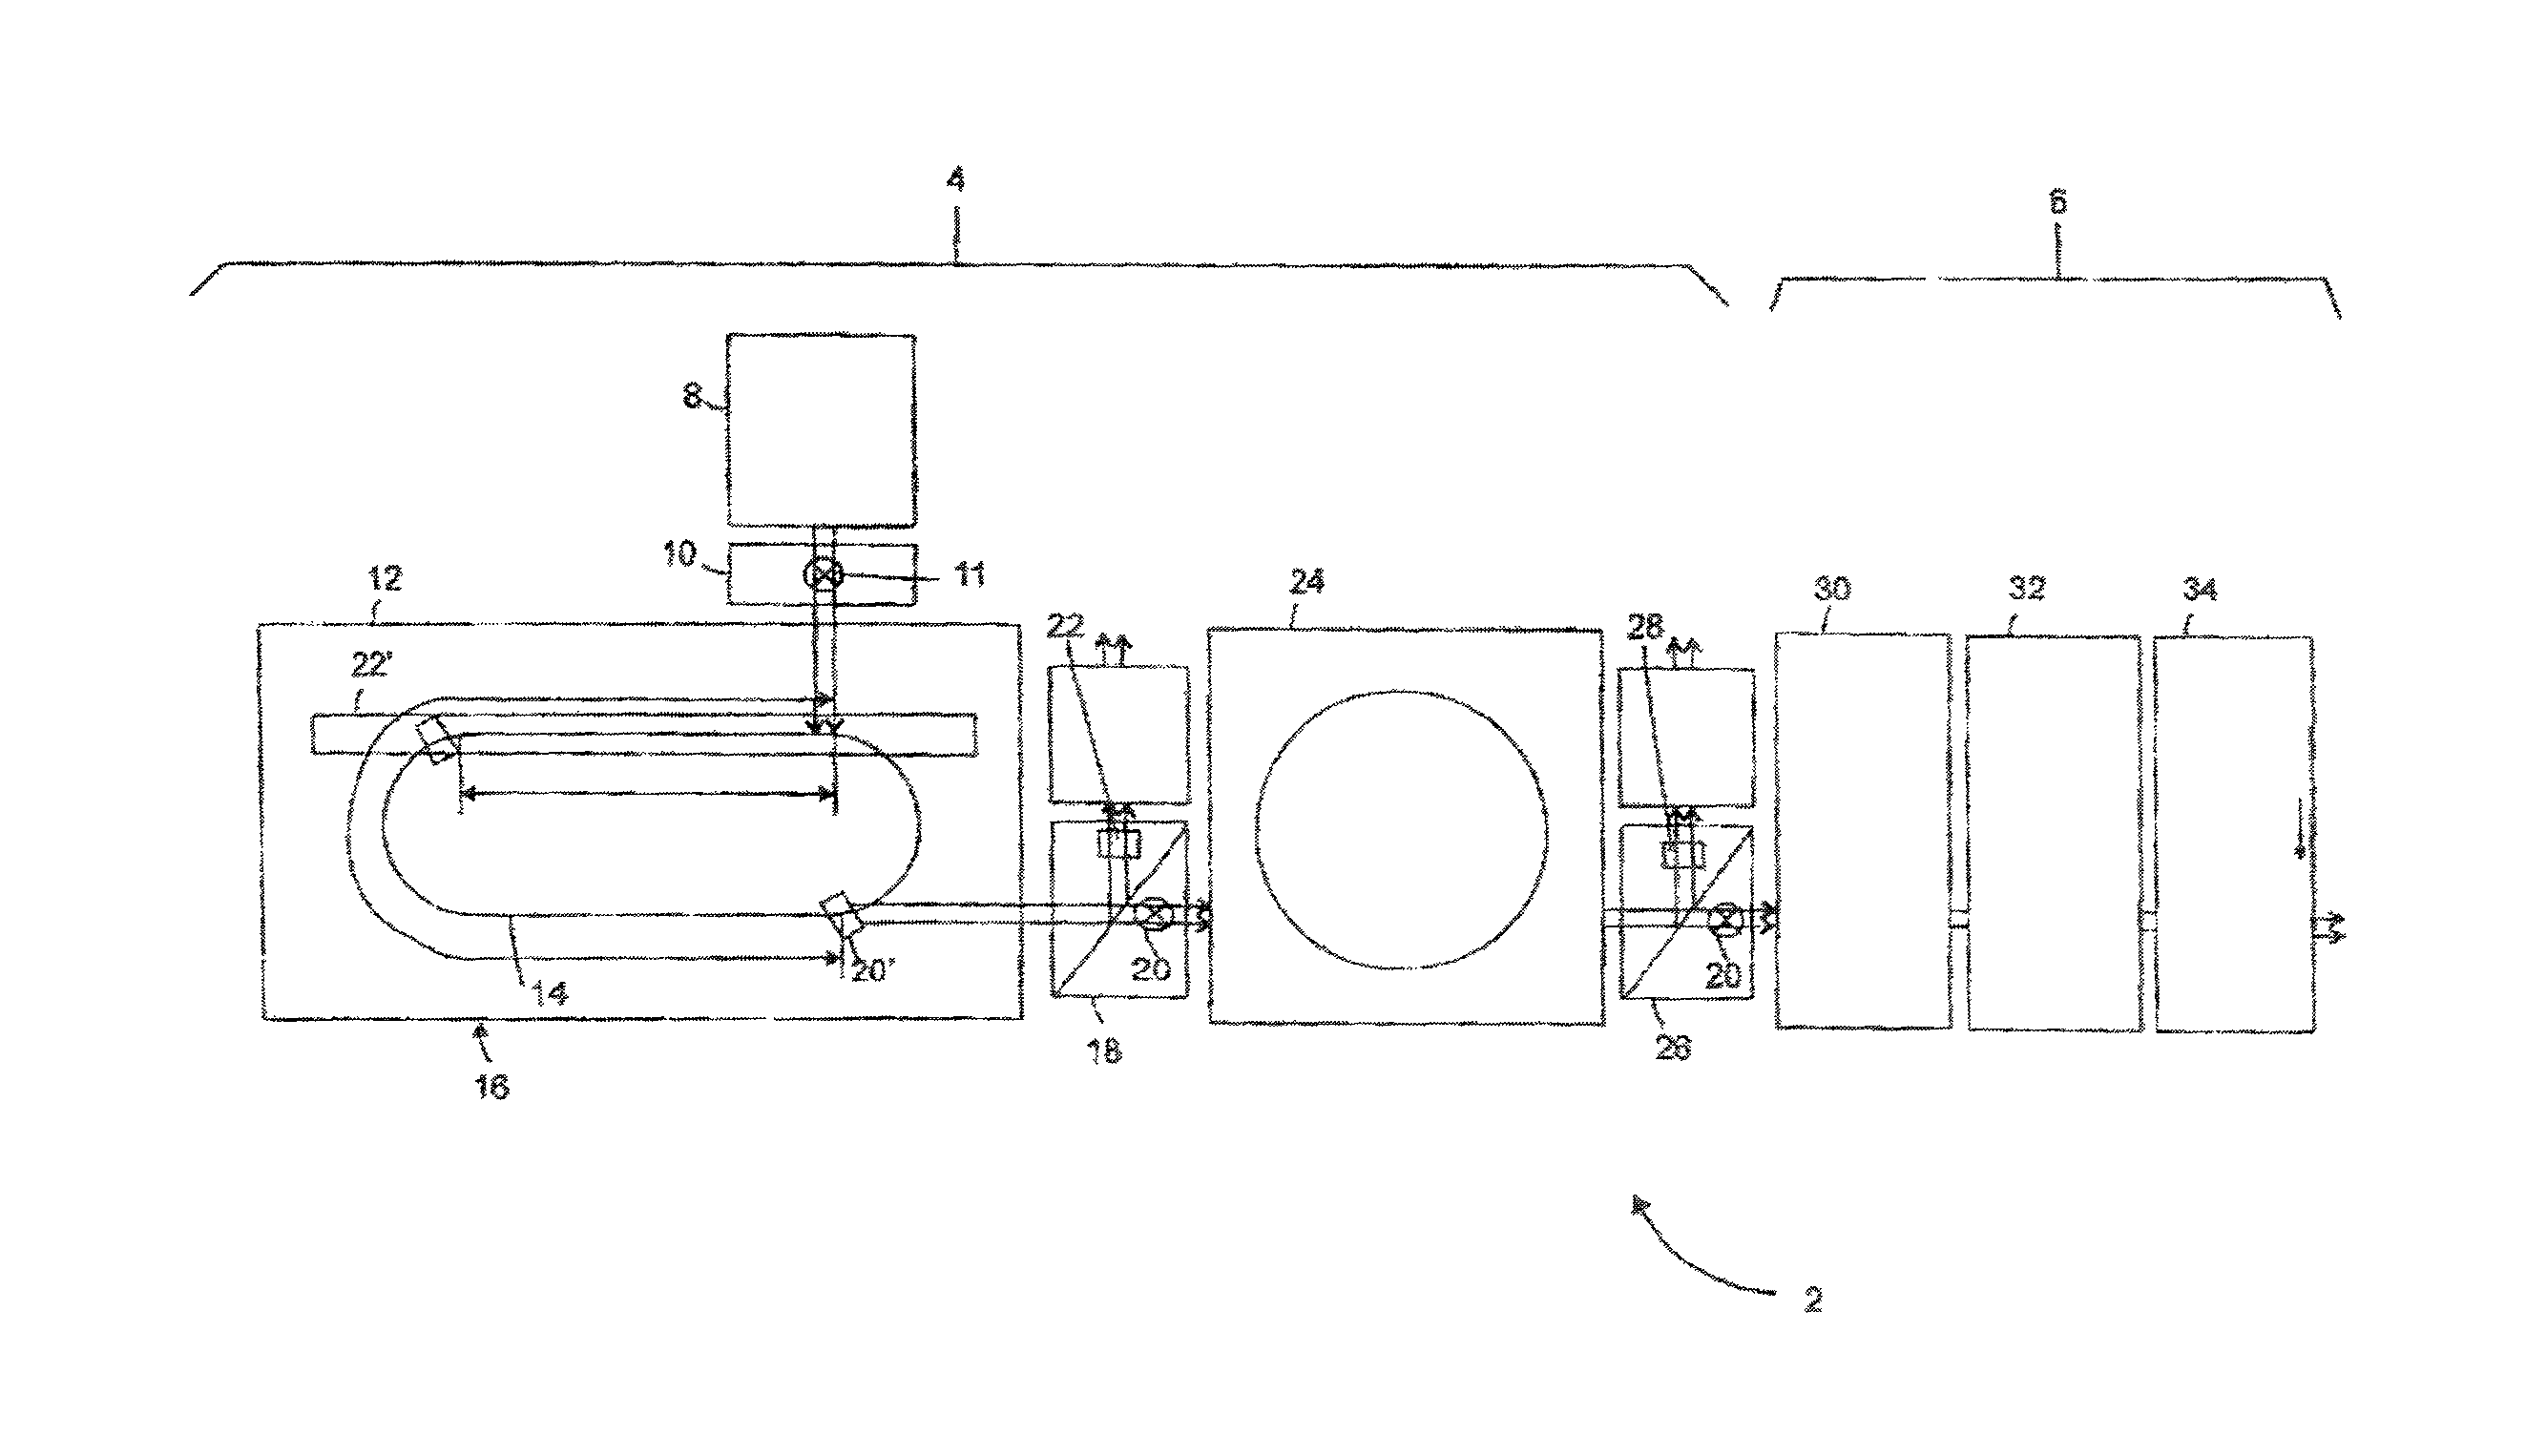 Facility and method for producing containers